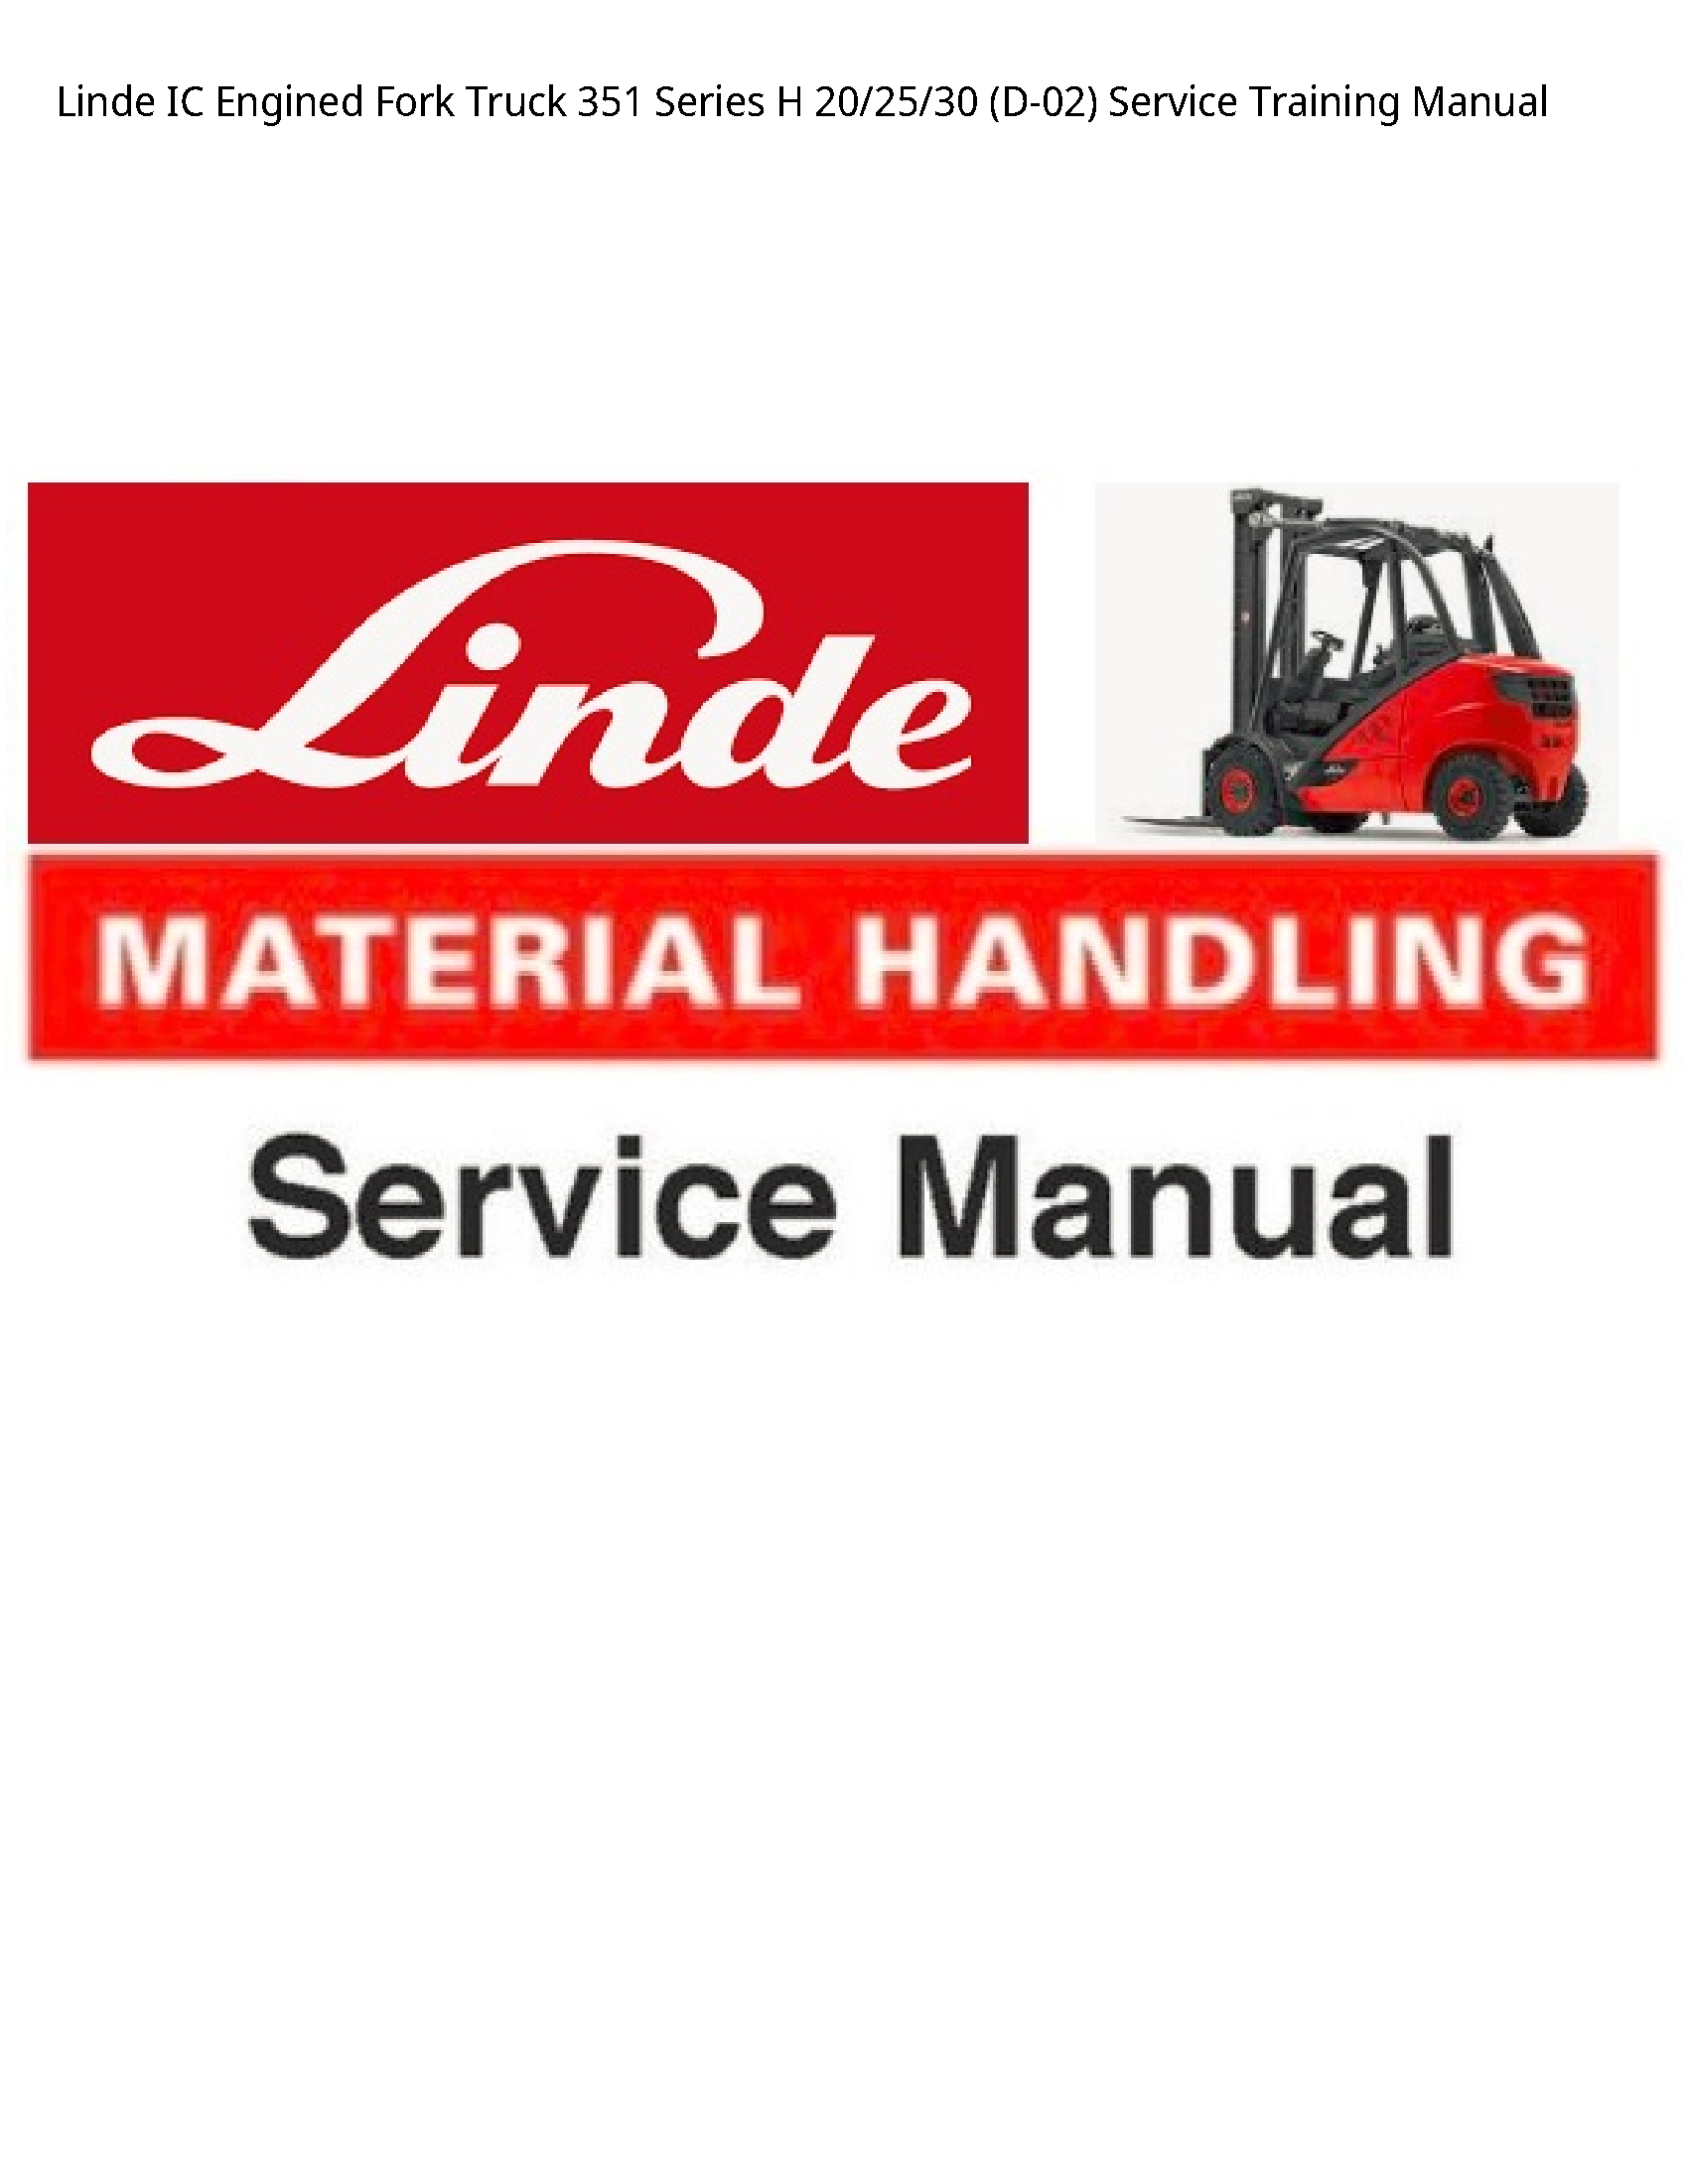 Linde 351 IC Engined Fork Truck Series Service Training manual